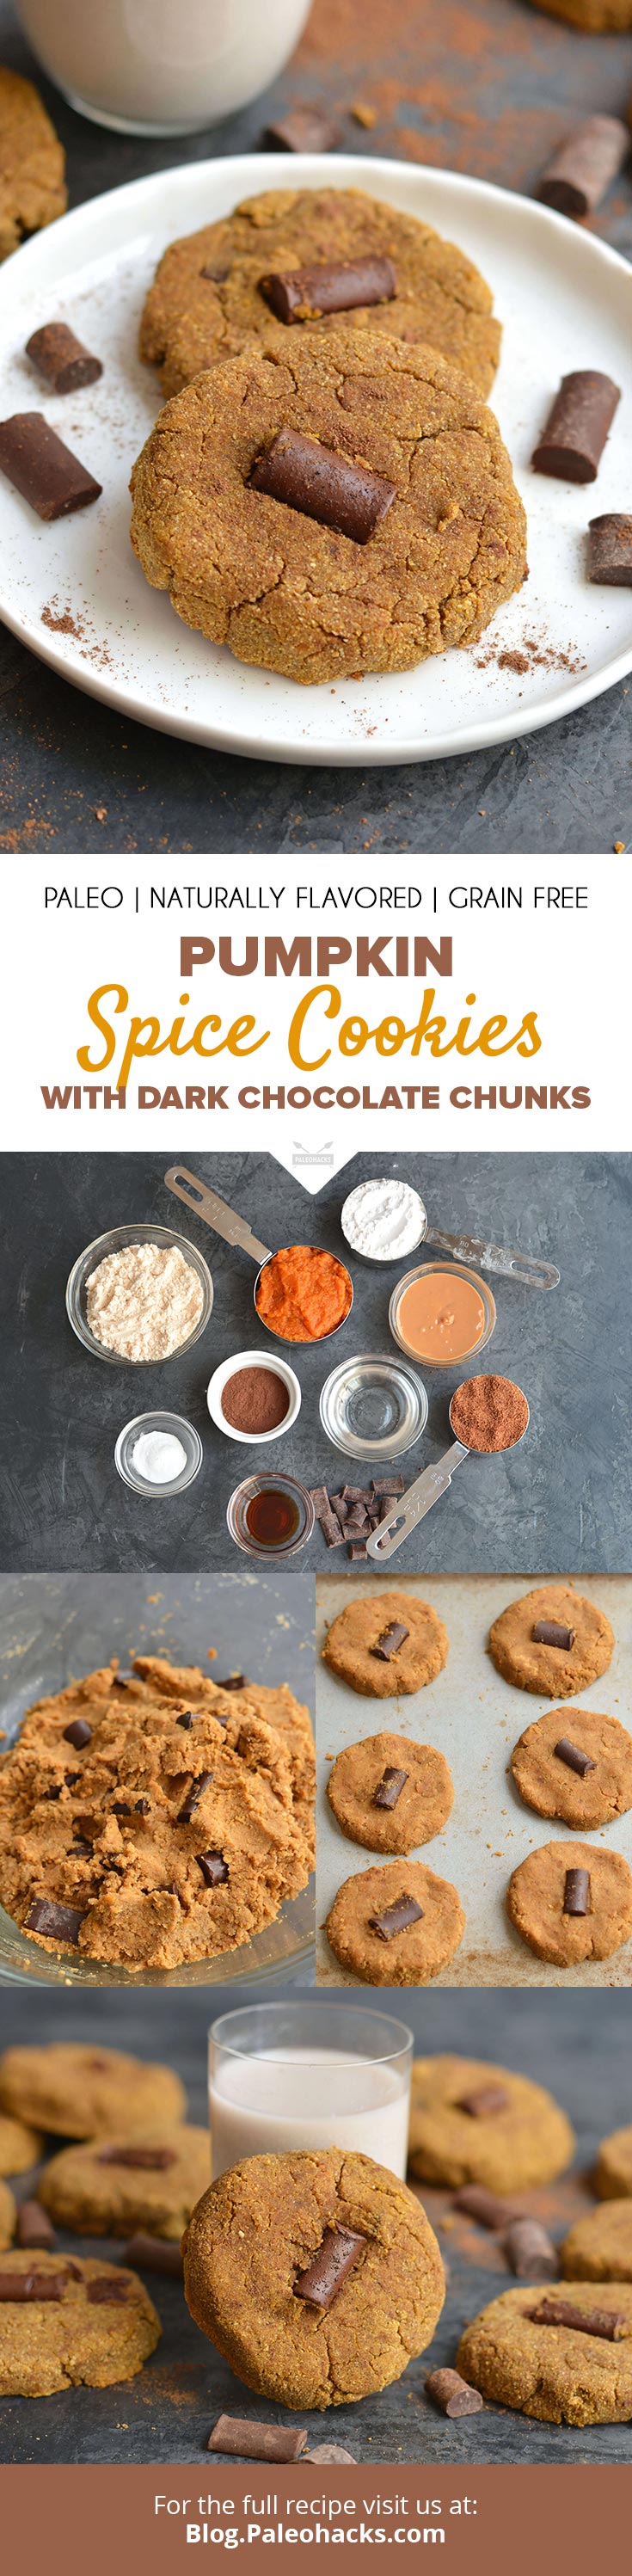 Chocolate chips instantly upgrade cookies, and when you add them to coconut pumpkin dough, it becomes a killer recipe in a class of its own!